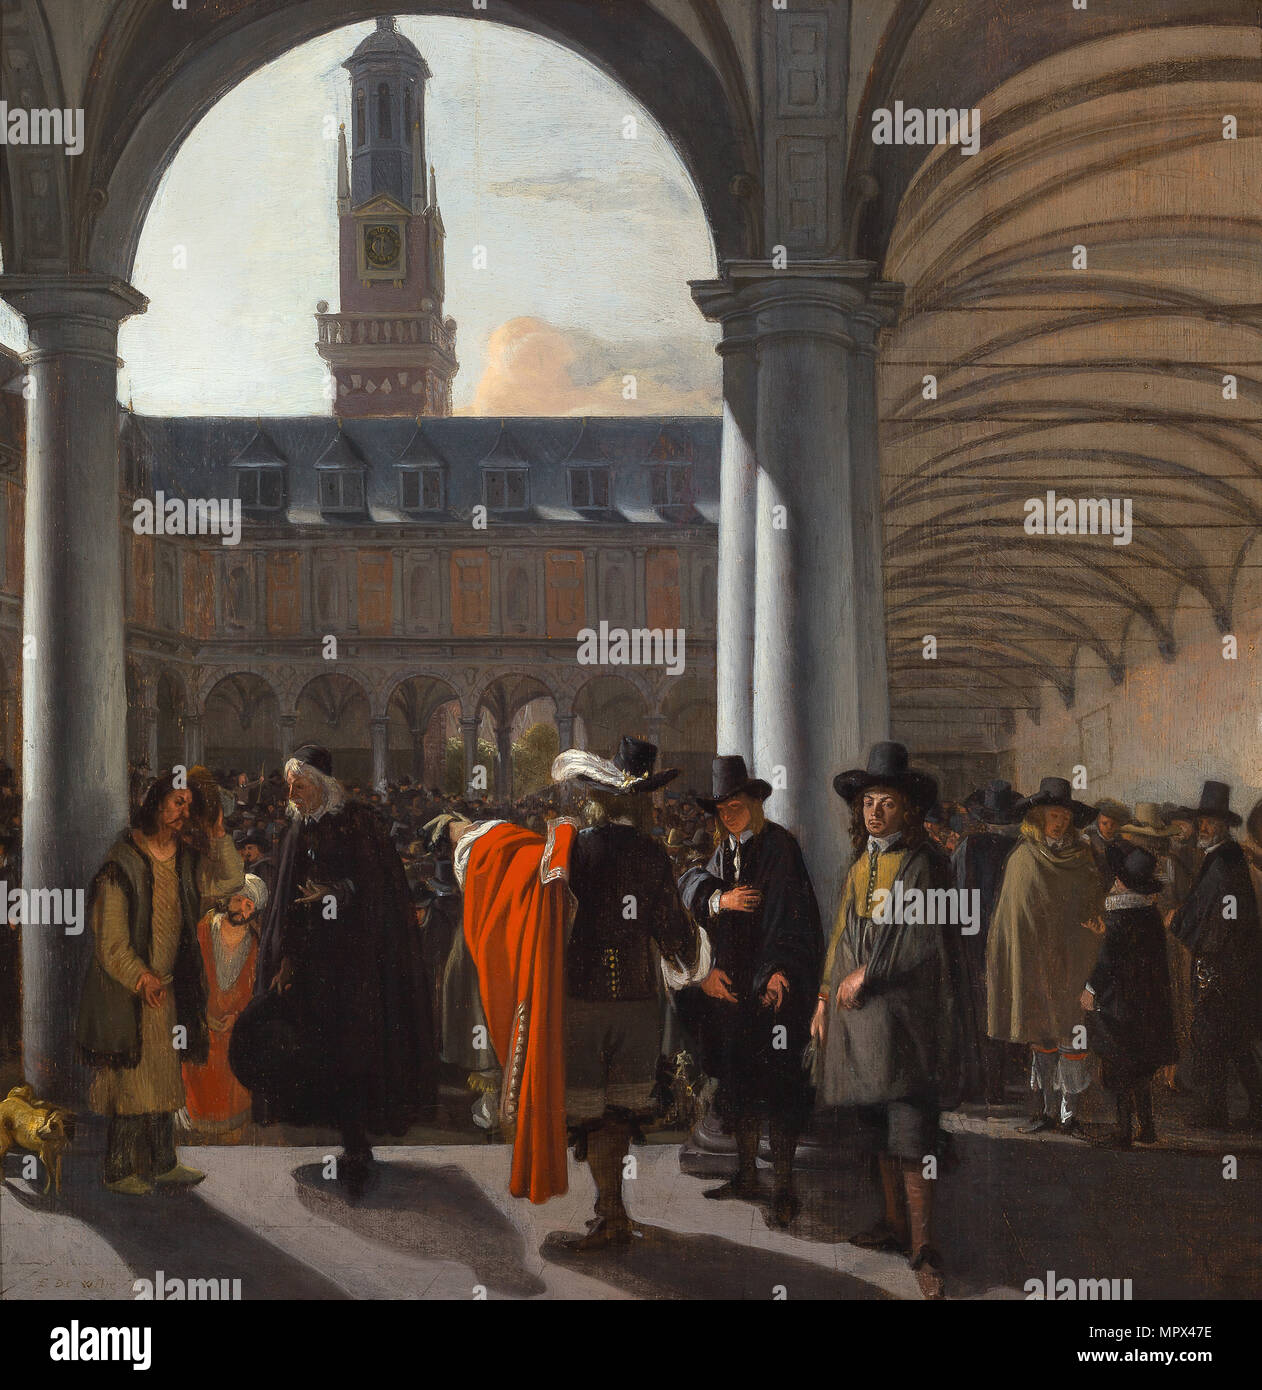 The Courtyard of the Beurs in Amsterdam, 1653. Stock Photo